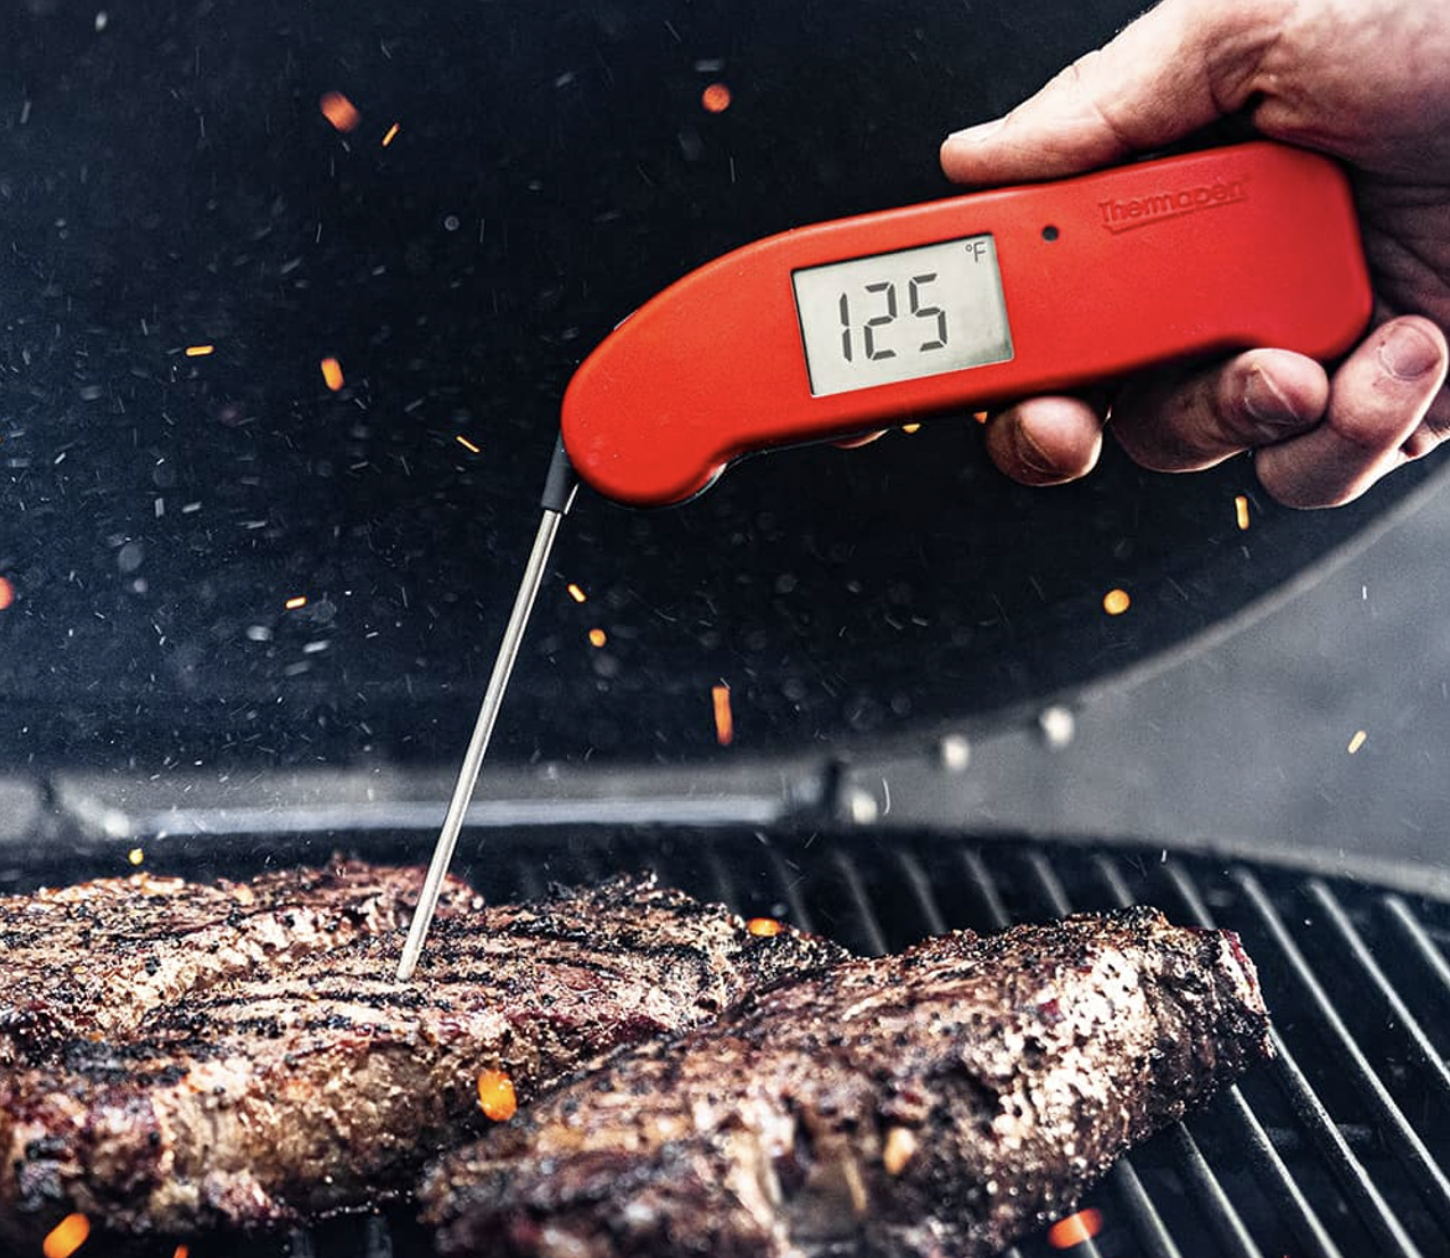 The Thermapen Classic Meat Thermometer Is 30% Off